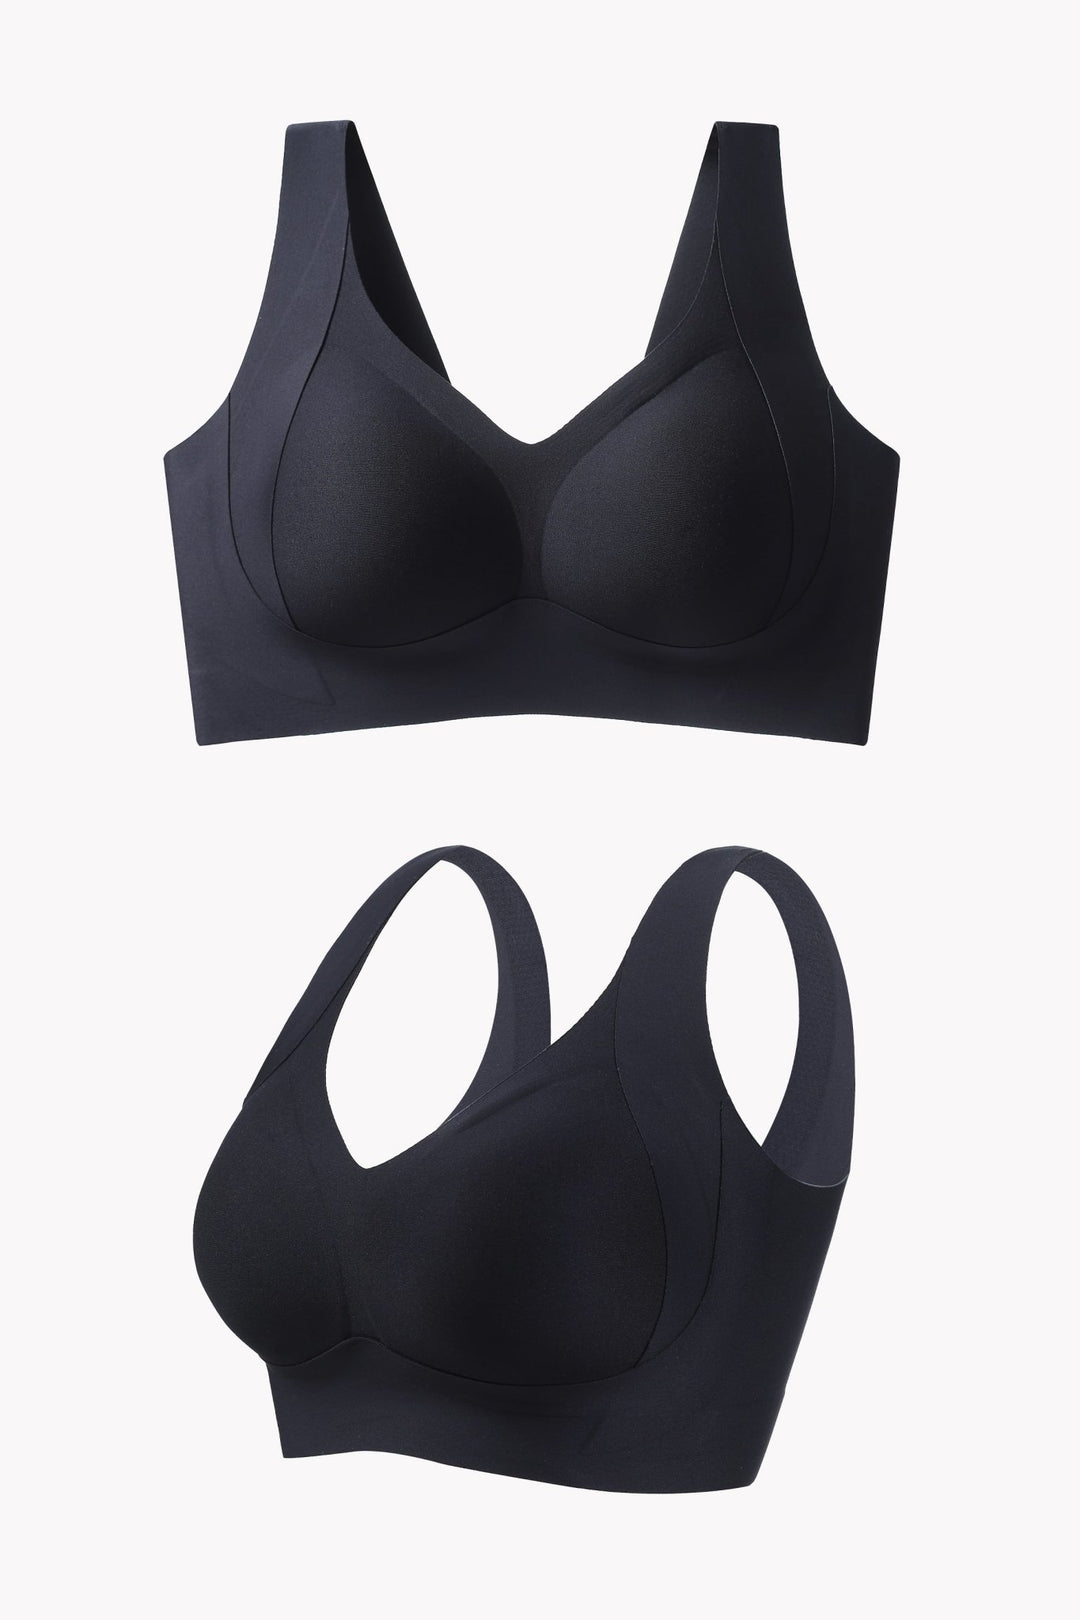 Underwire Vs. Wire-Free Bras: Is One Really Better?